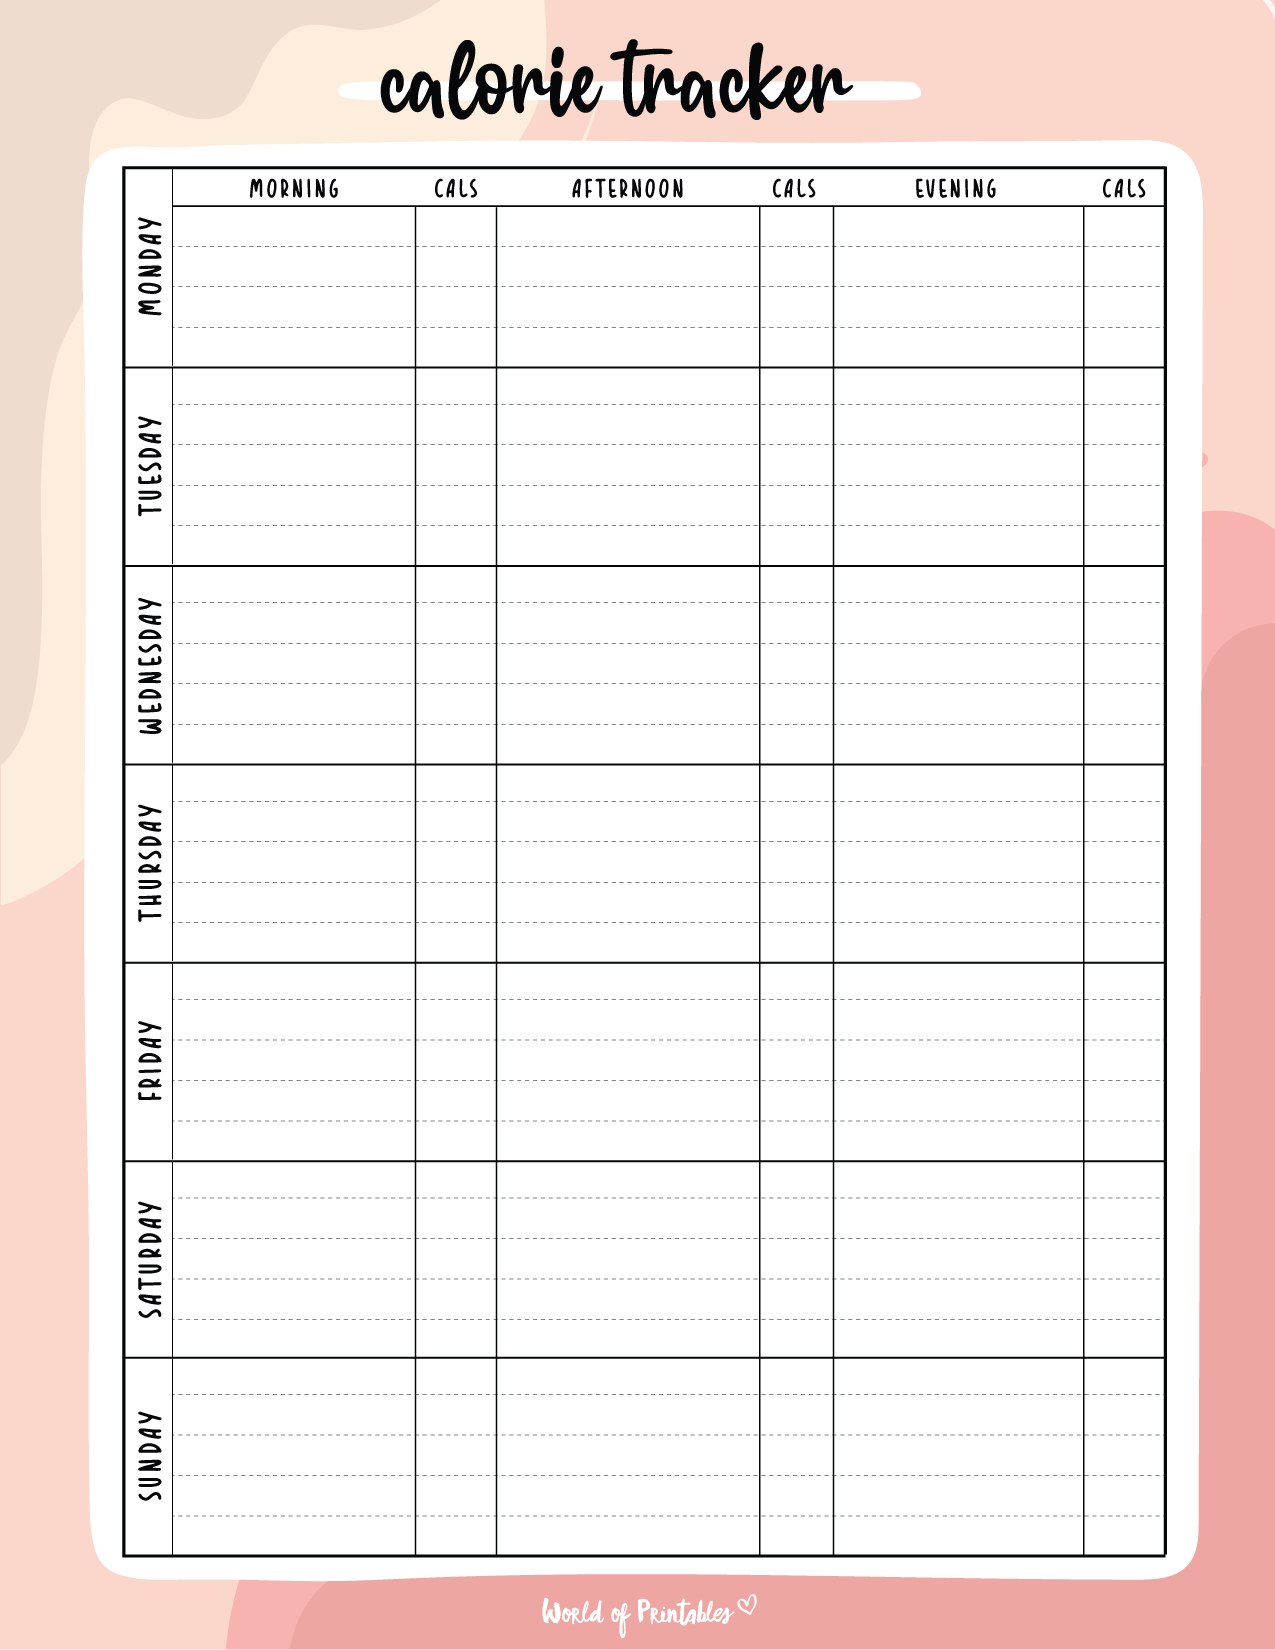 Free Printable Calorie Tracker World Of Printables - Free Printable Calorie Counter Journal